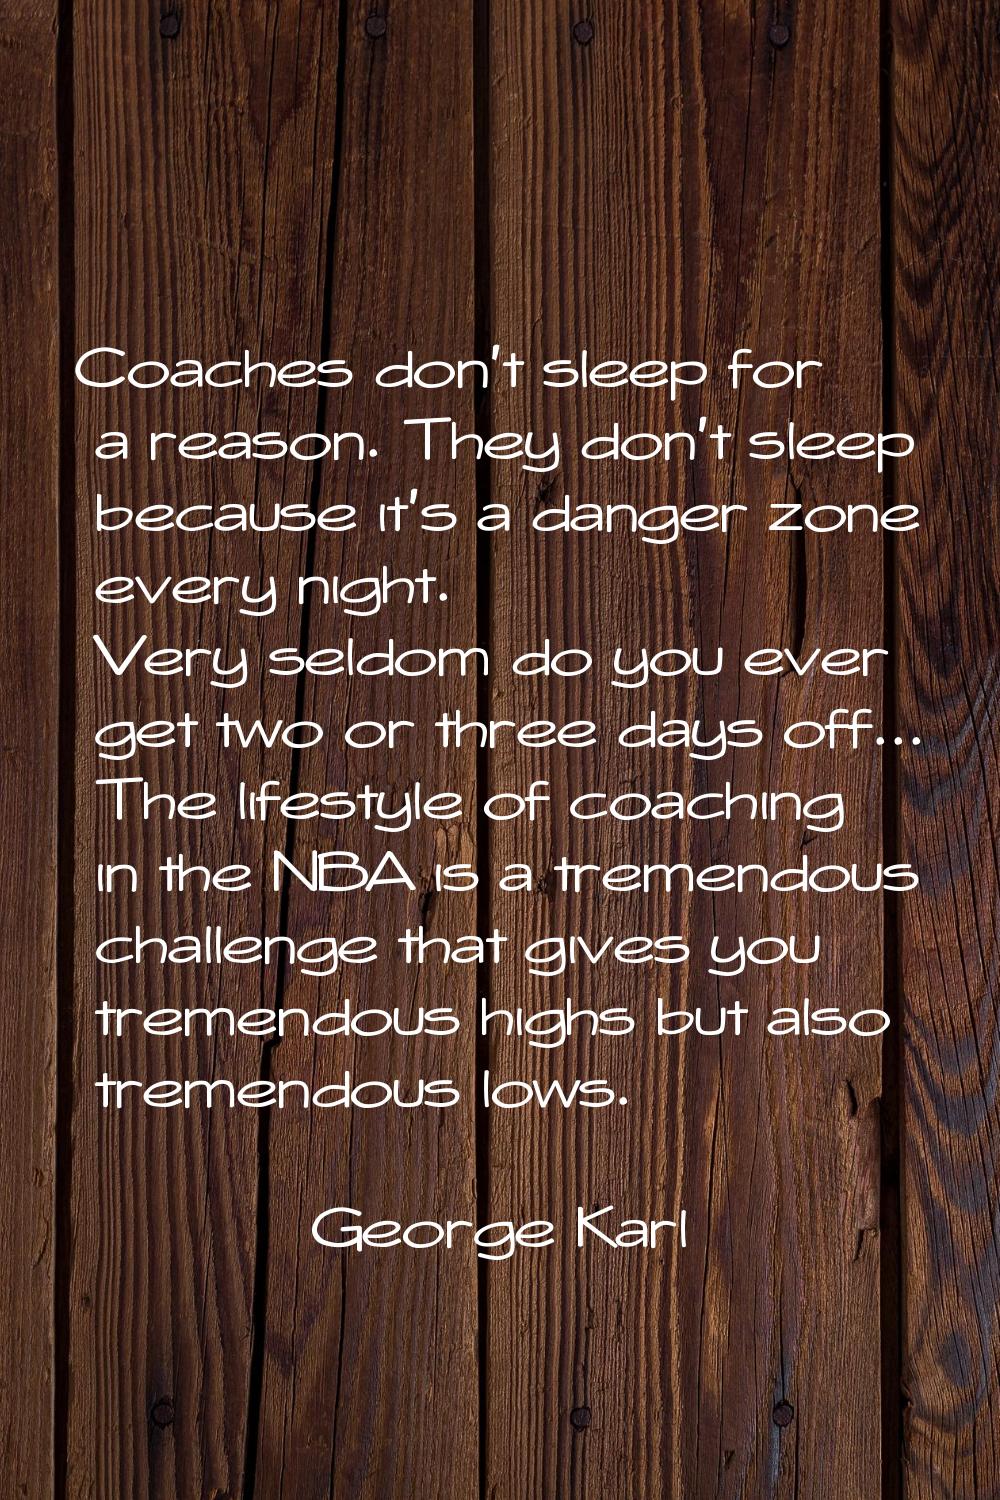 Coaches don't sleep for a reason. They don't sleep because it's a danger zone every night. Very sel